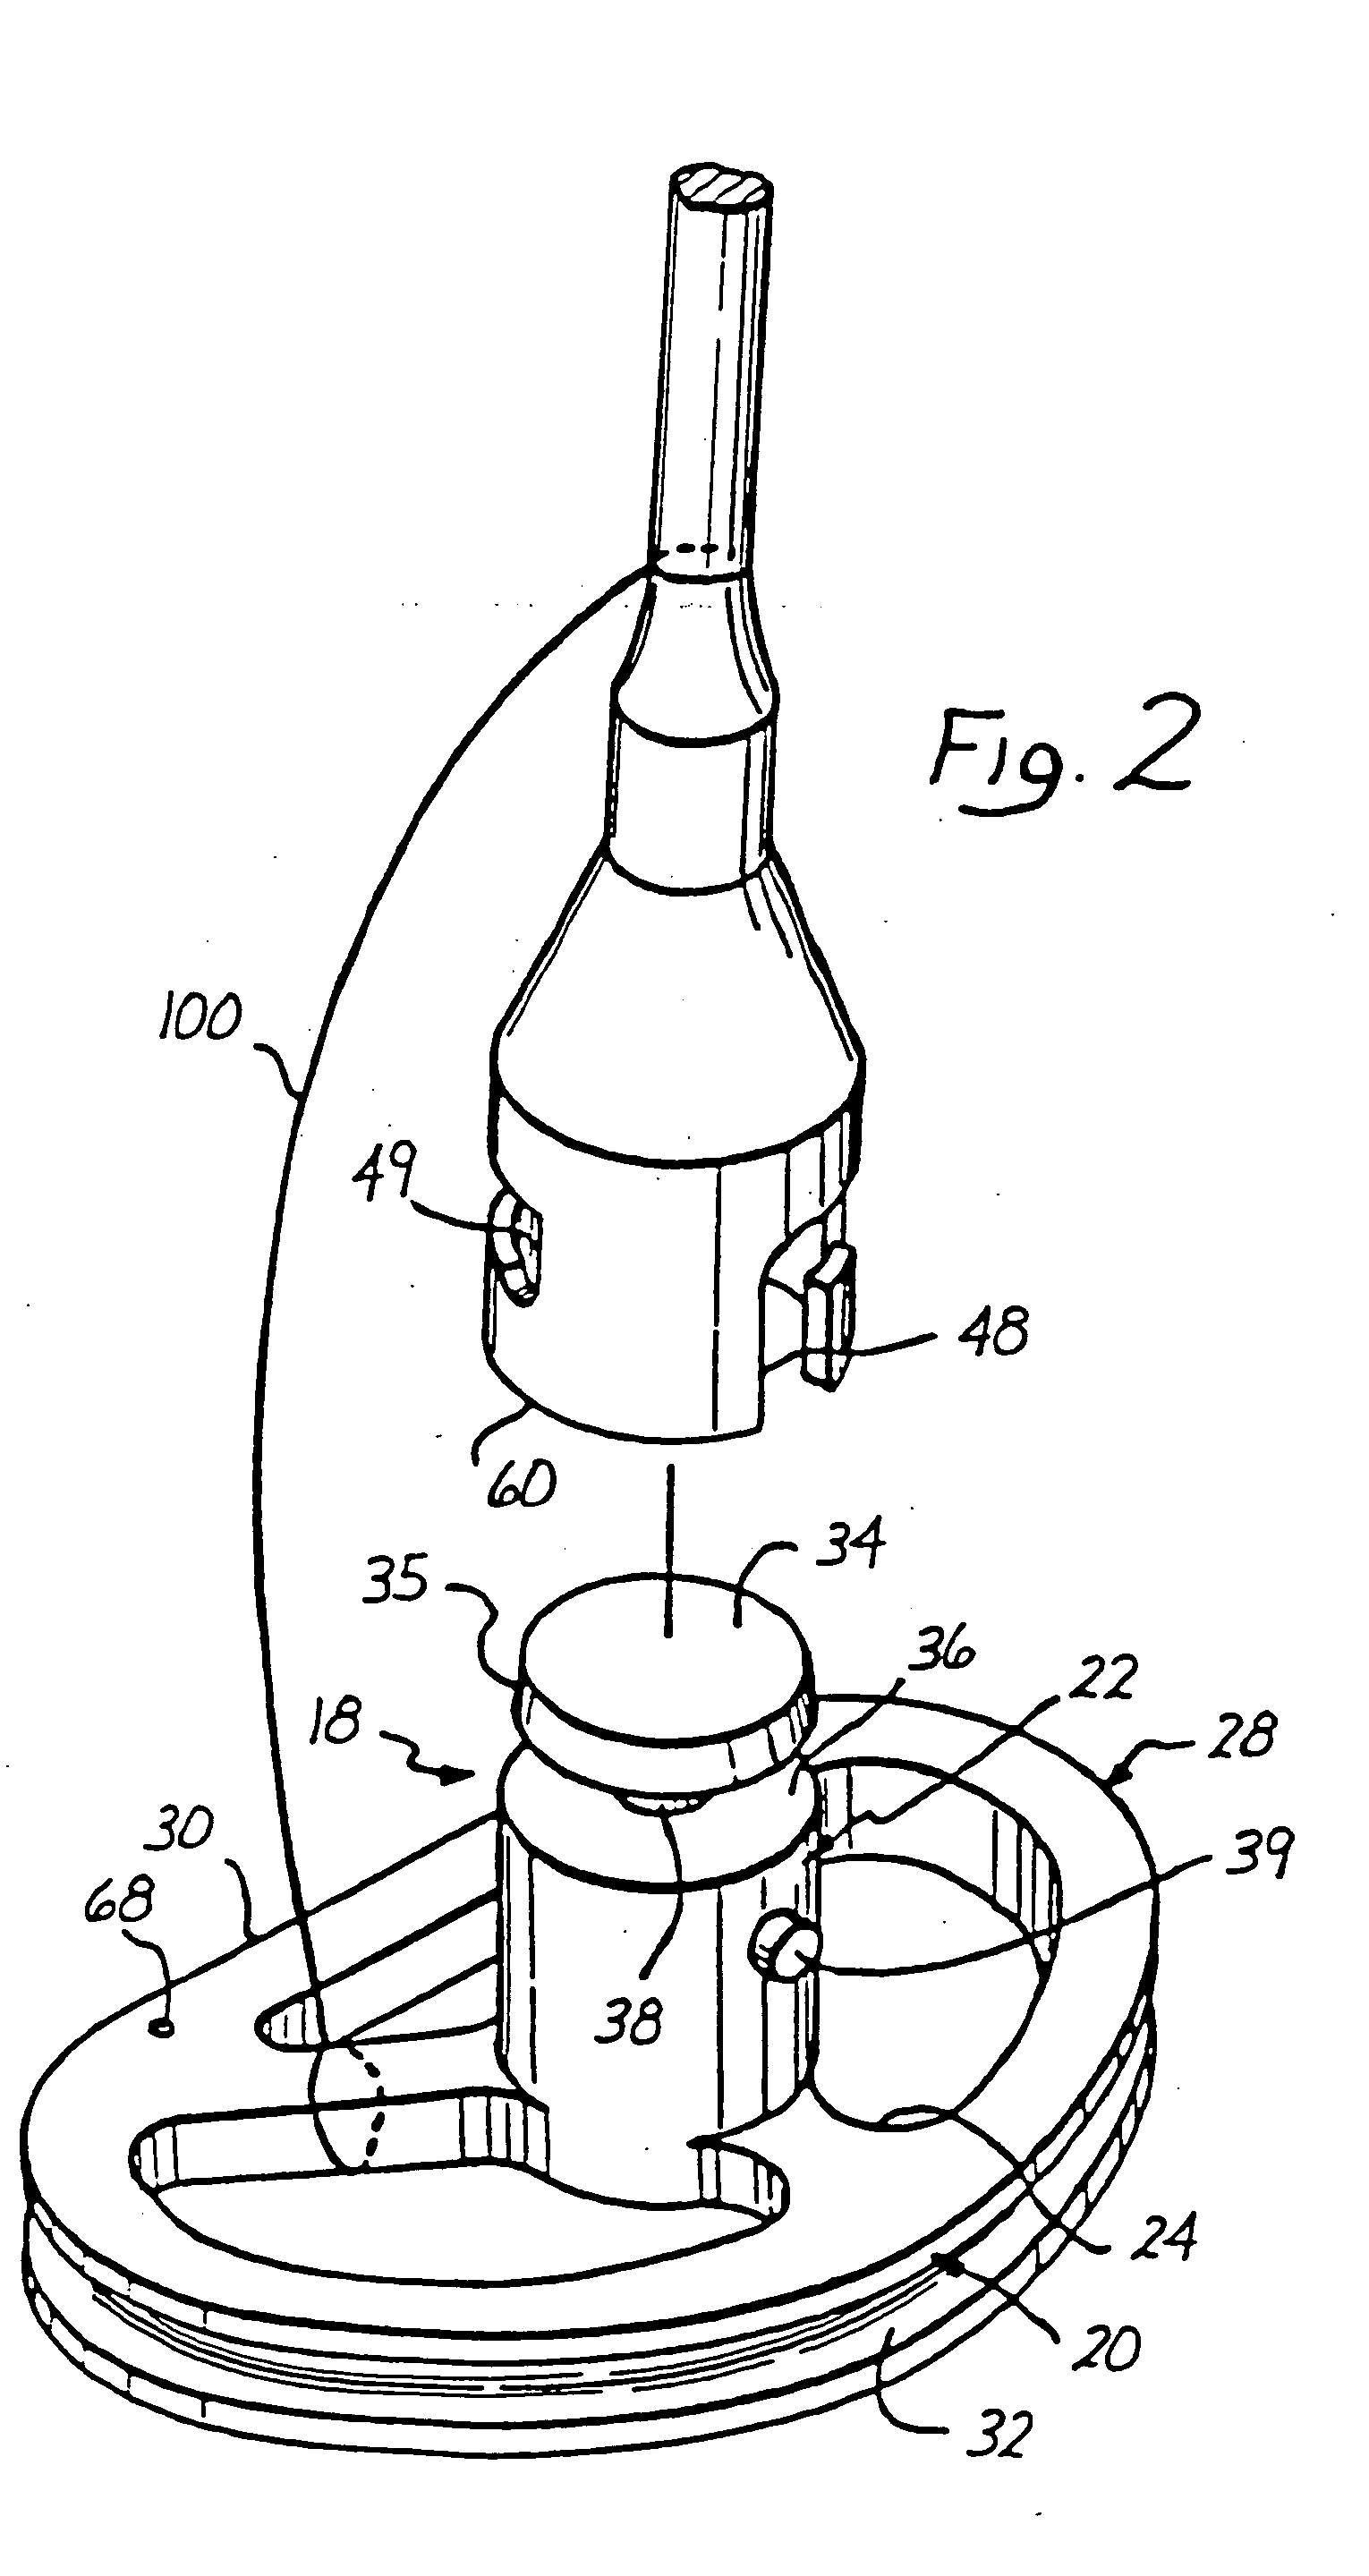 Annuloplasty ring delivery system and method